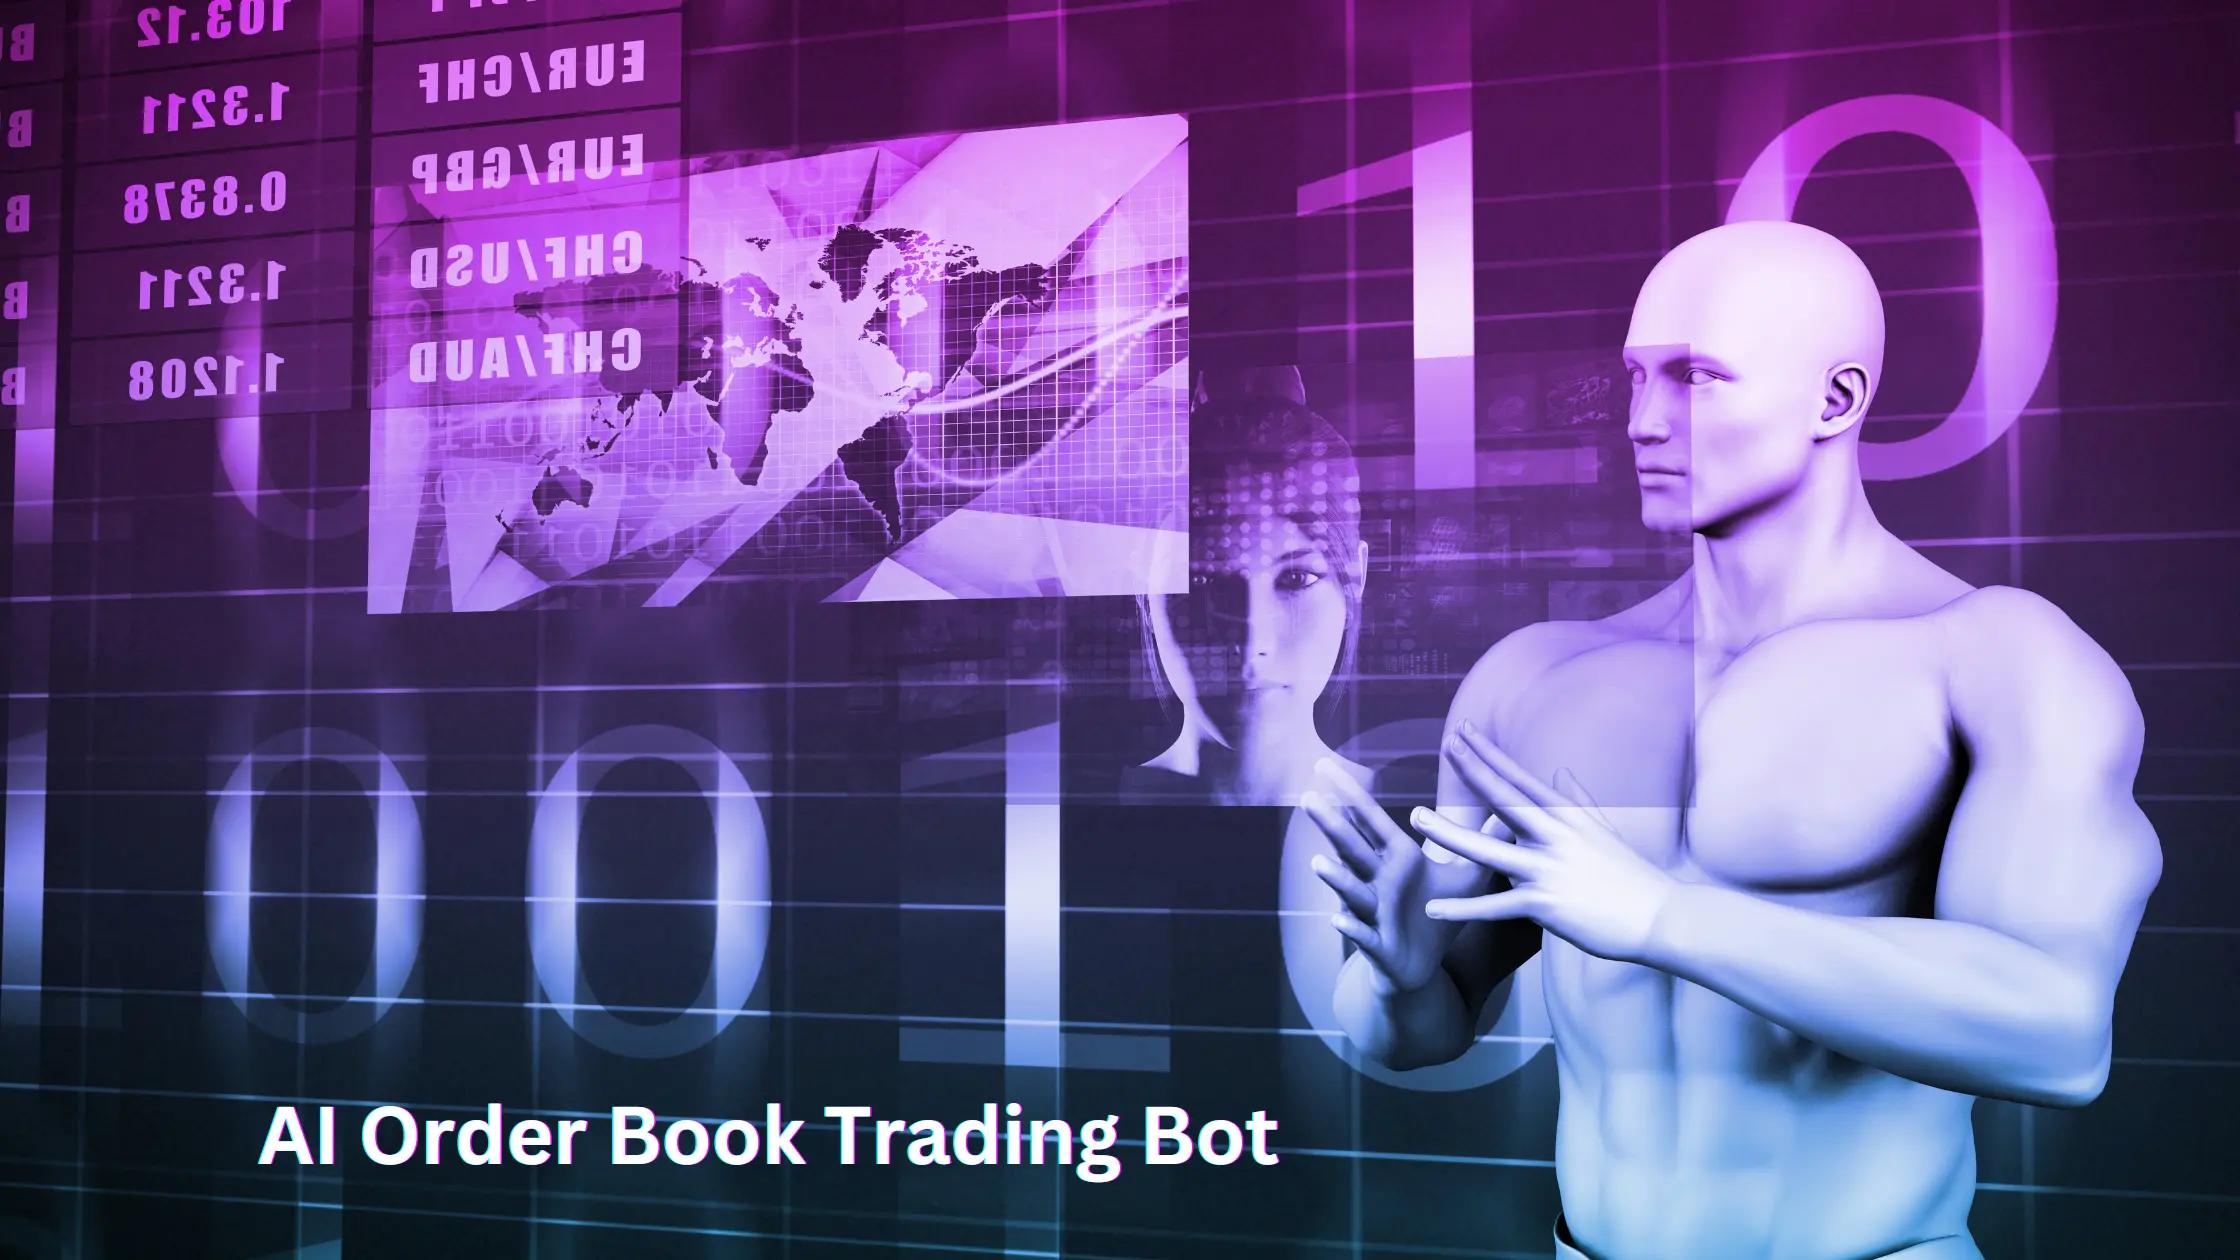 How to Design an AI Order Book Trading Bot